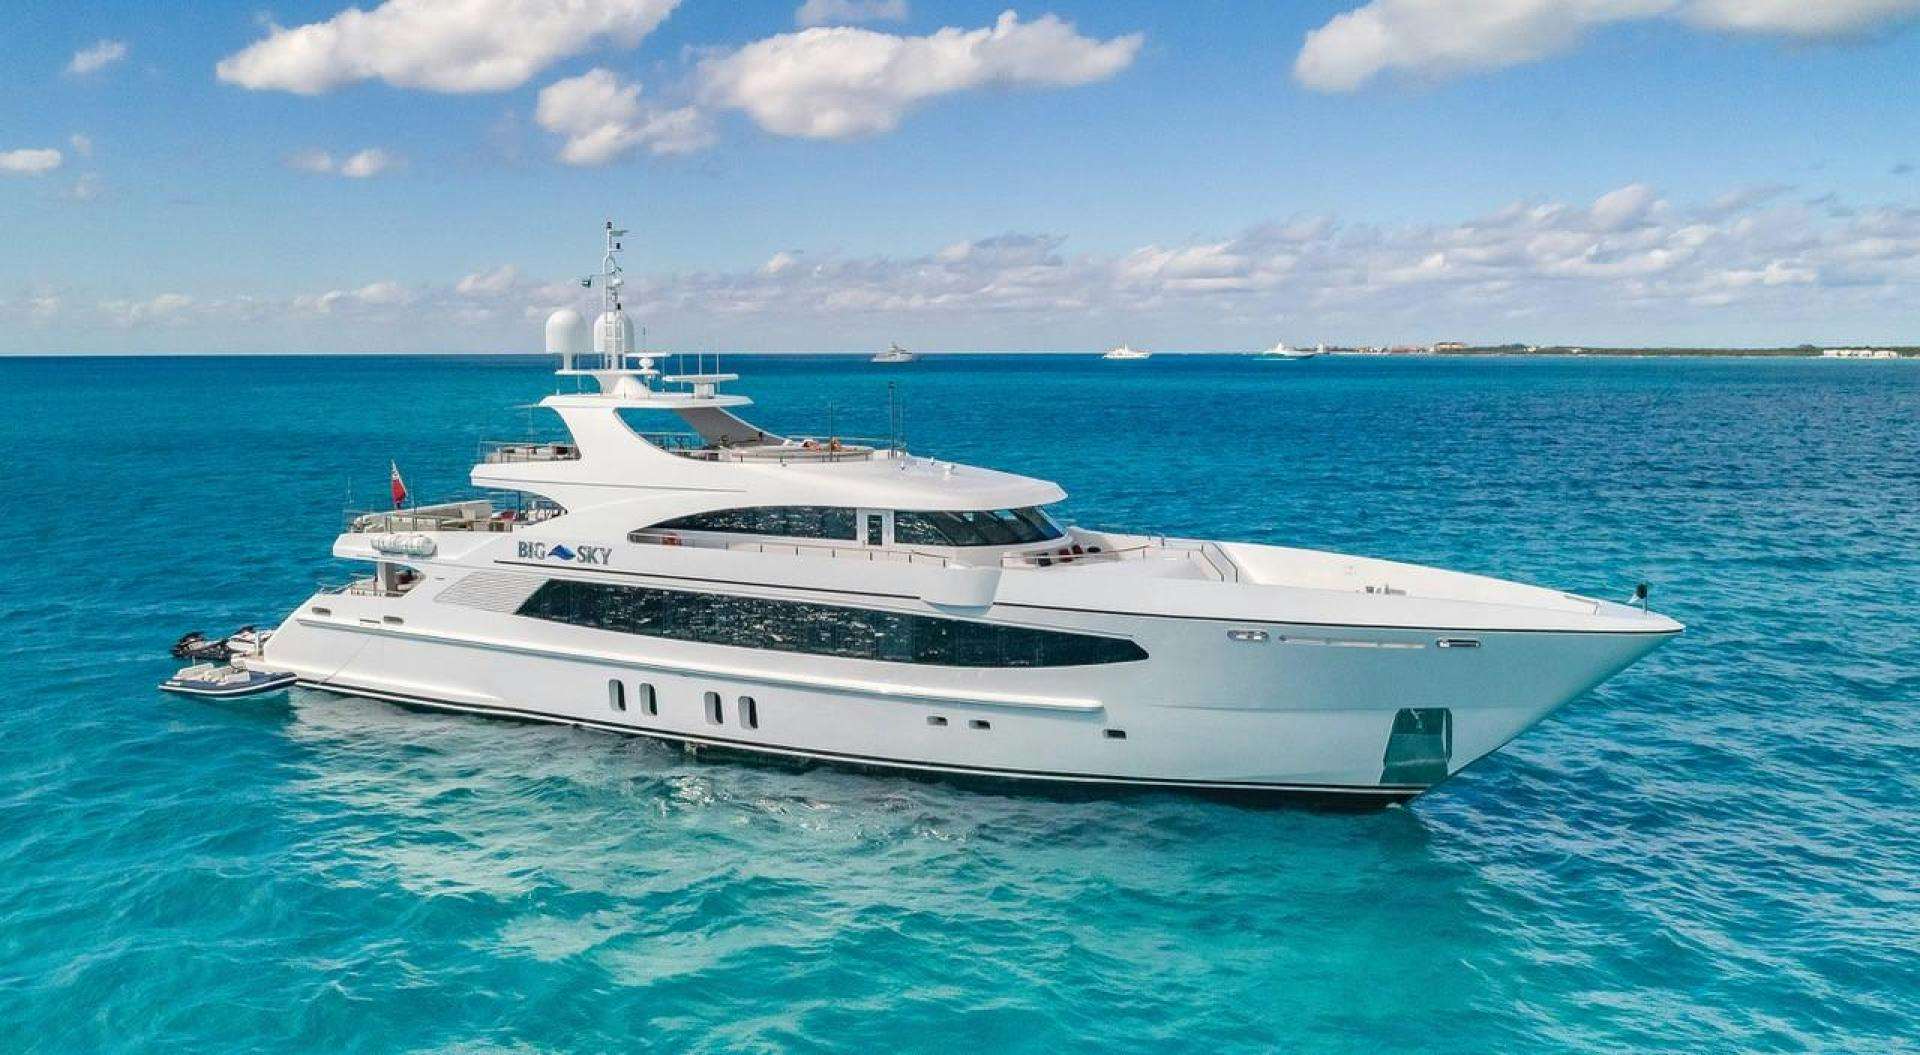 Watch Video for BIG SKY Yacht for Sale